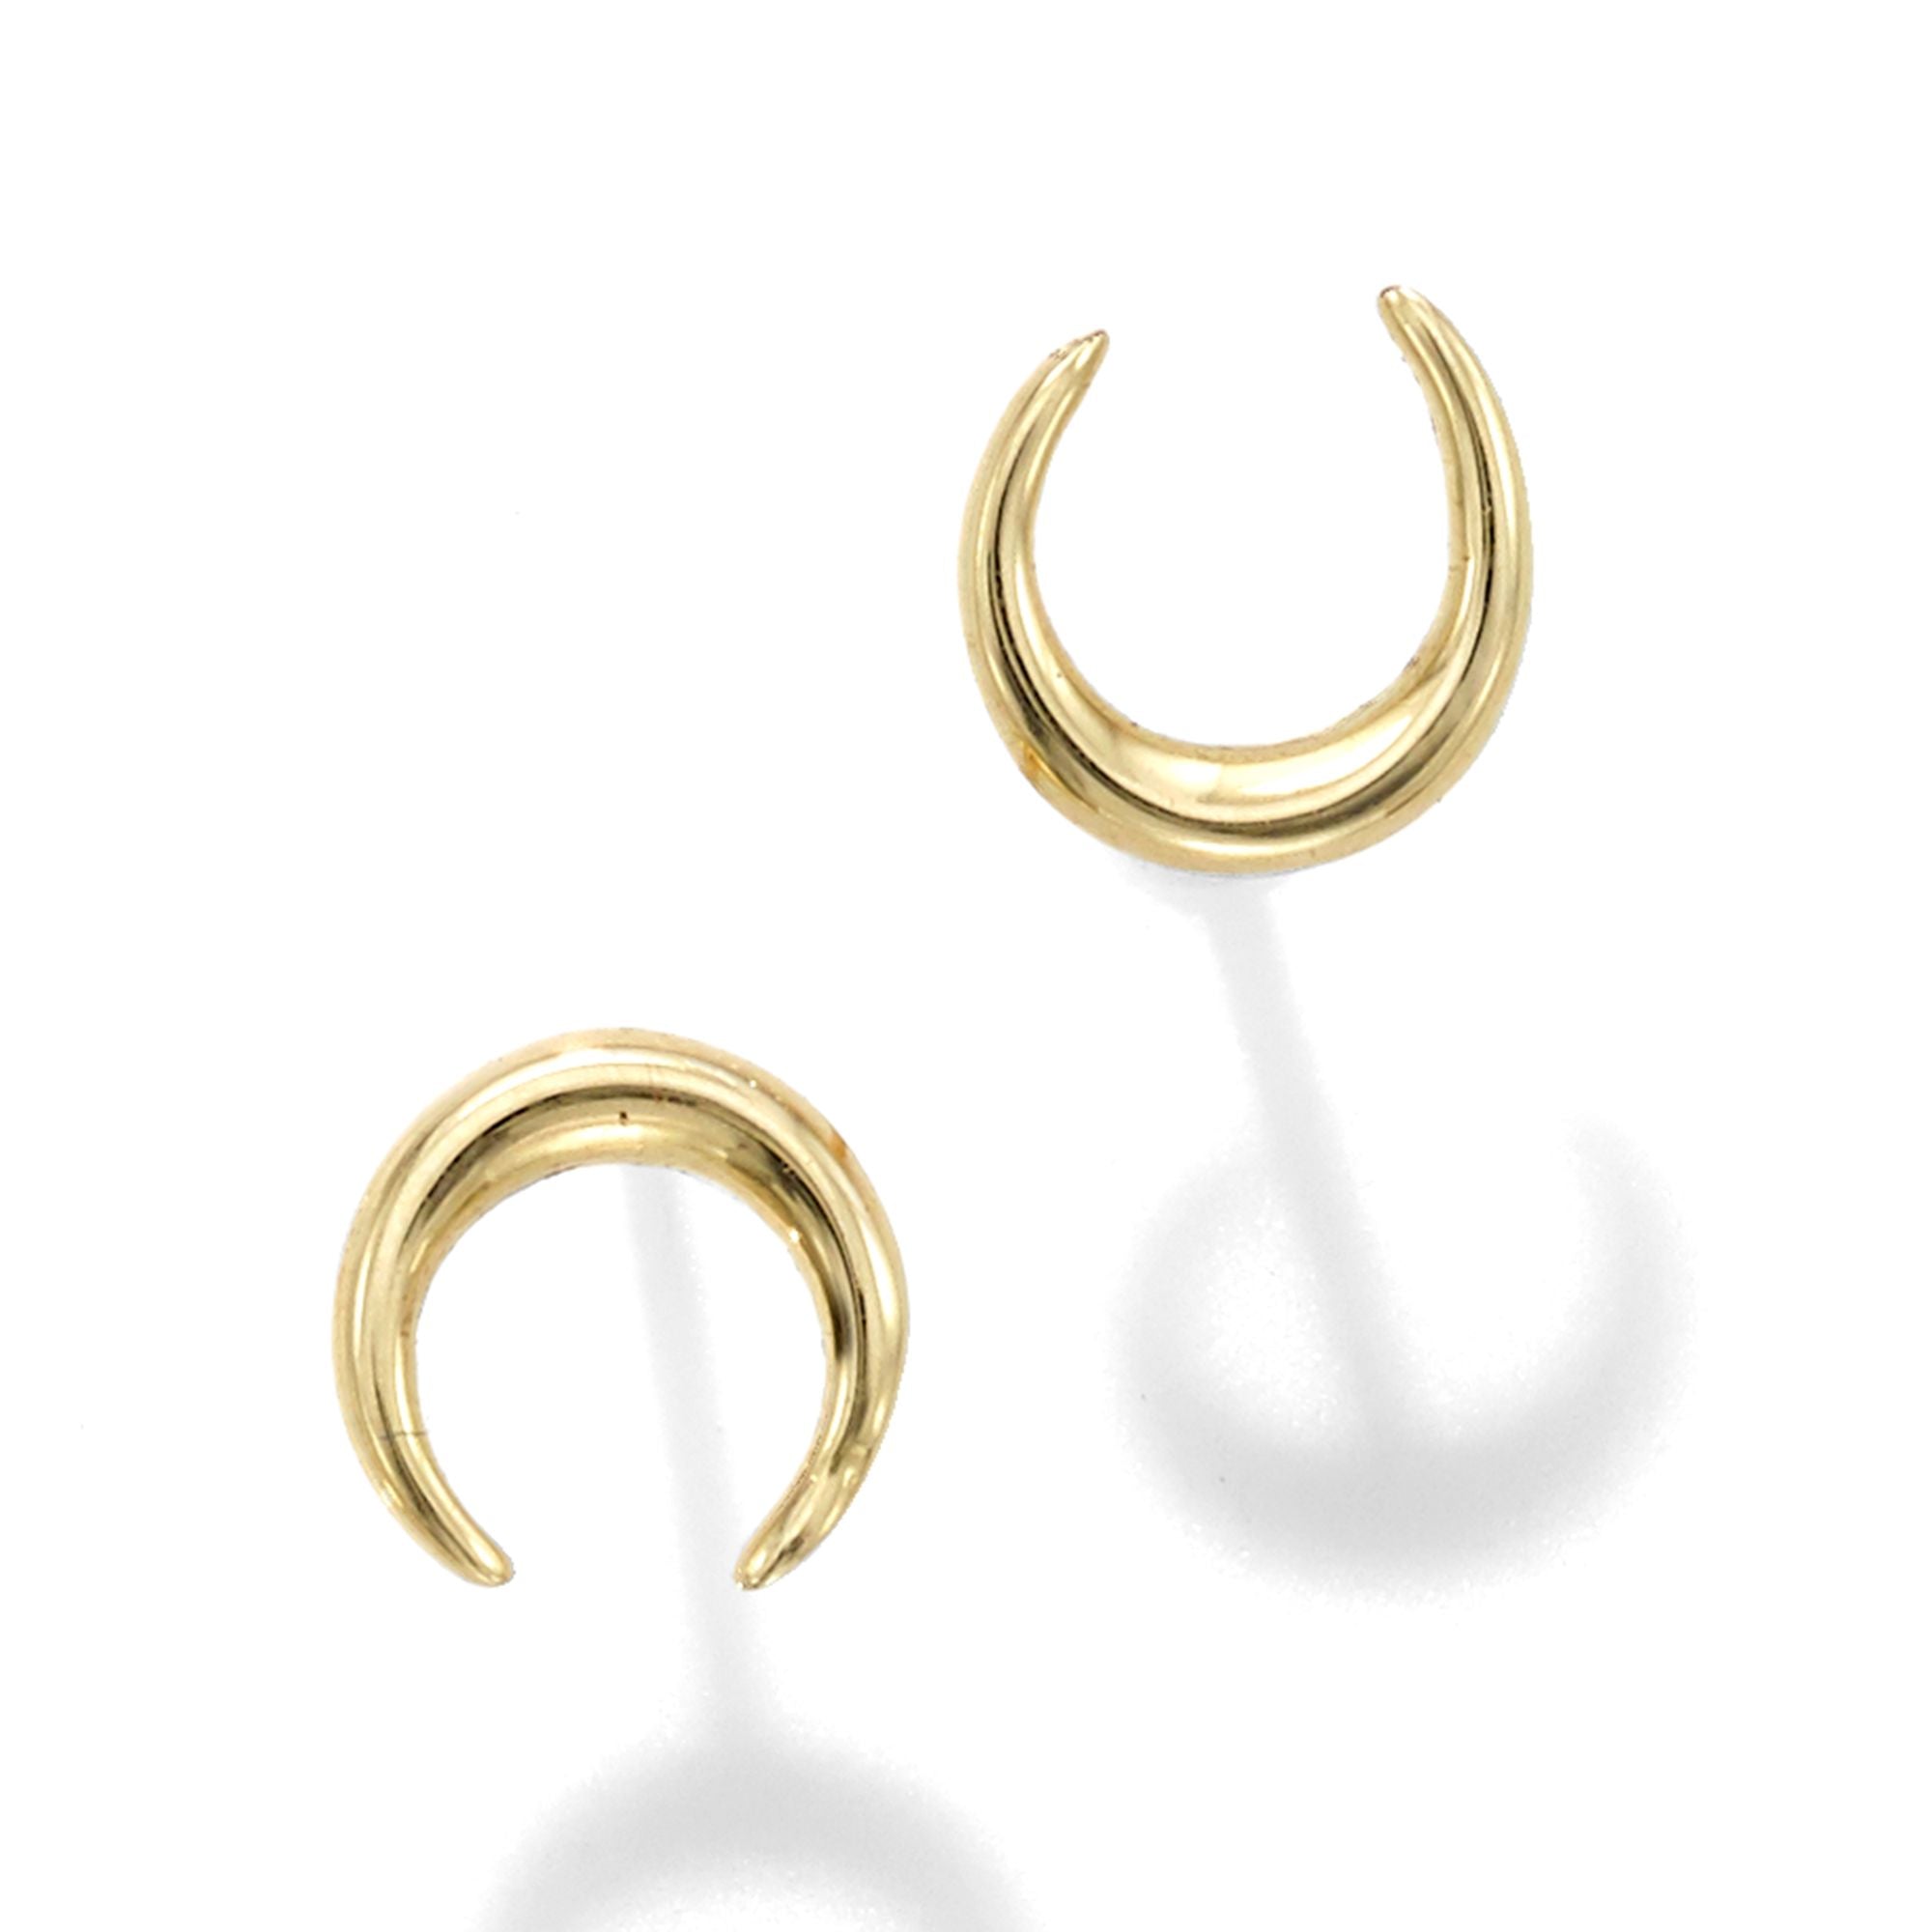 Minimalist Solid Gold Polished Crescent Moon Post Earrings with Push Back Clasp - wingroupjewelry